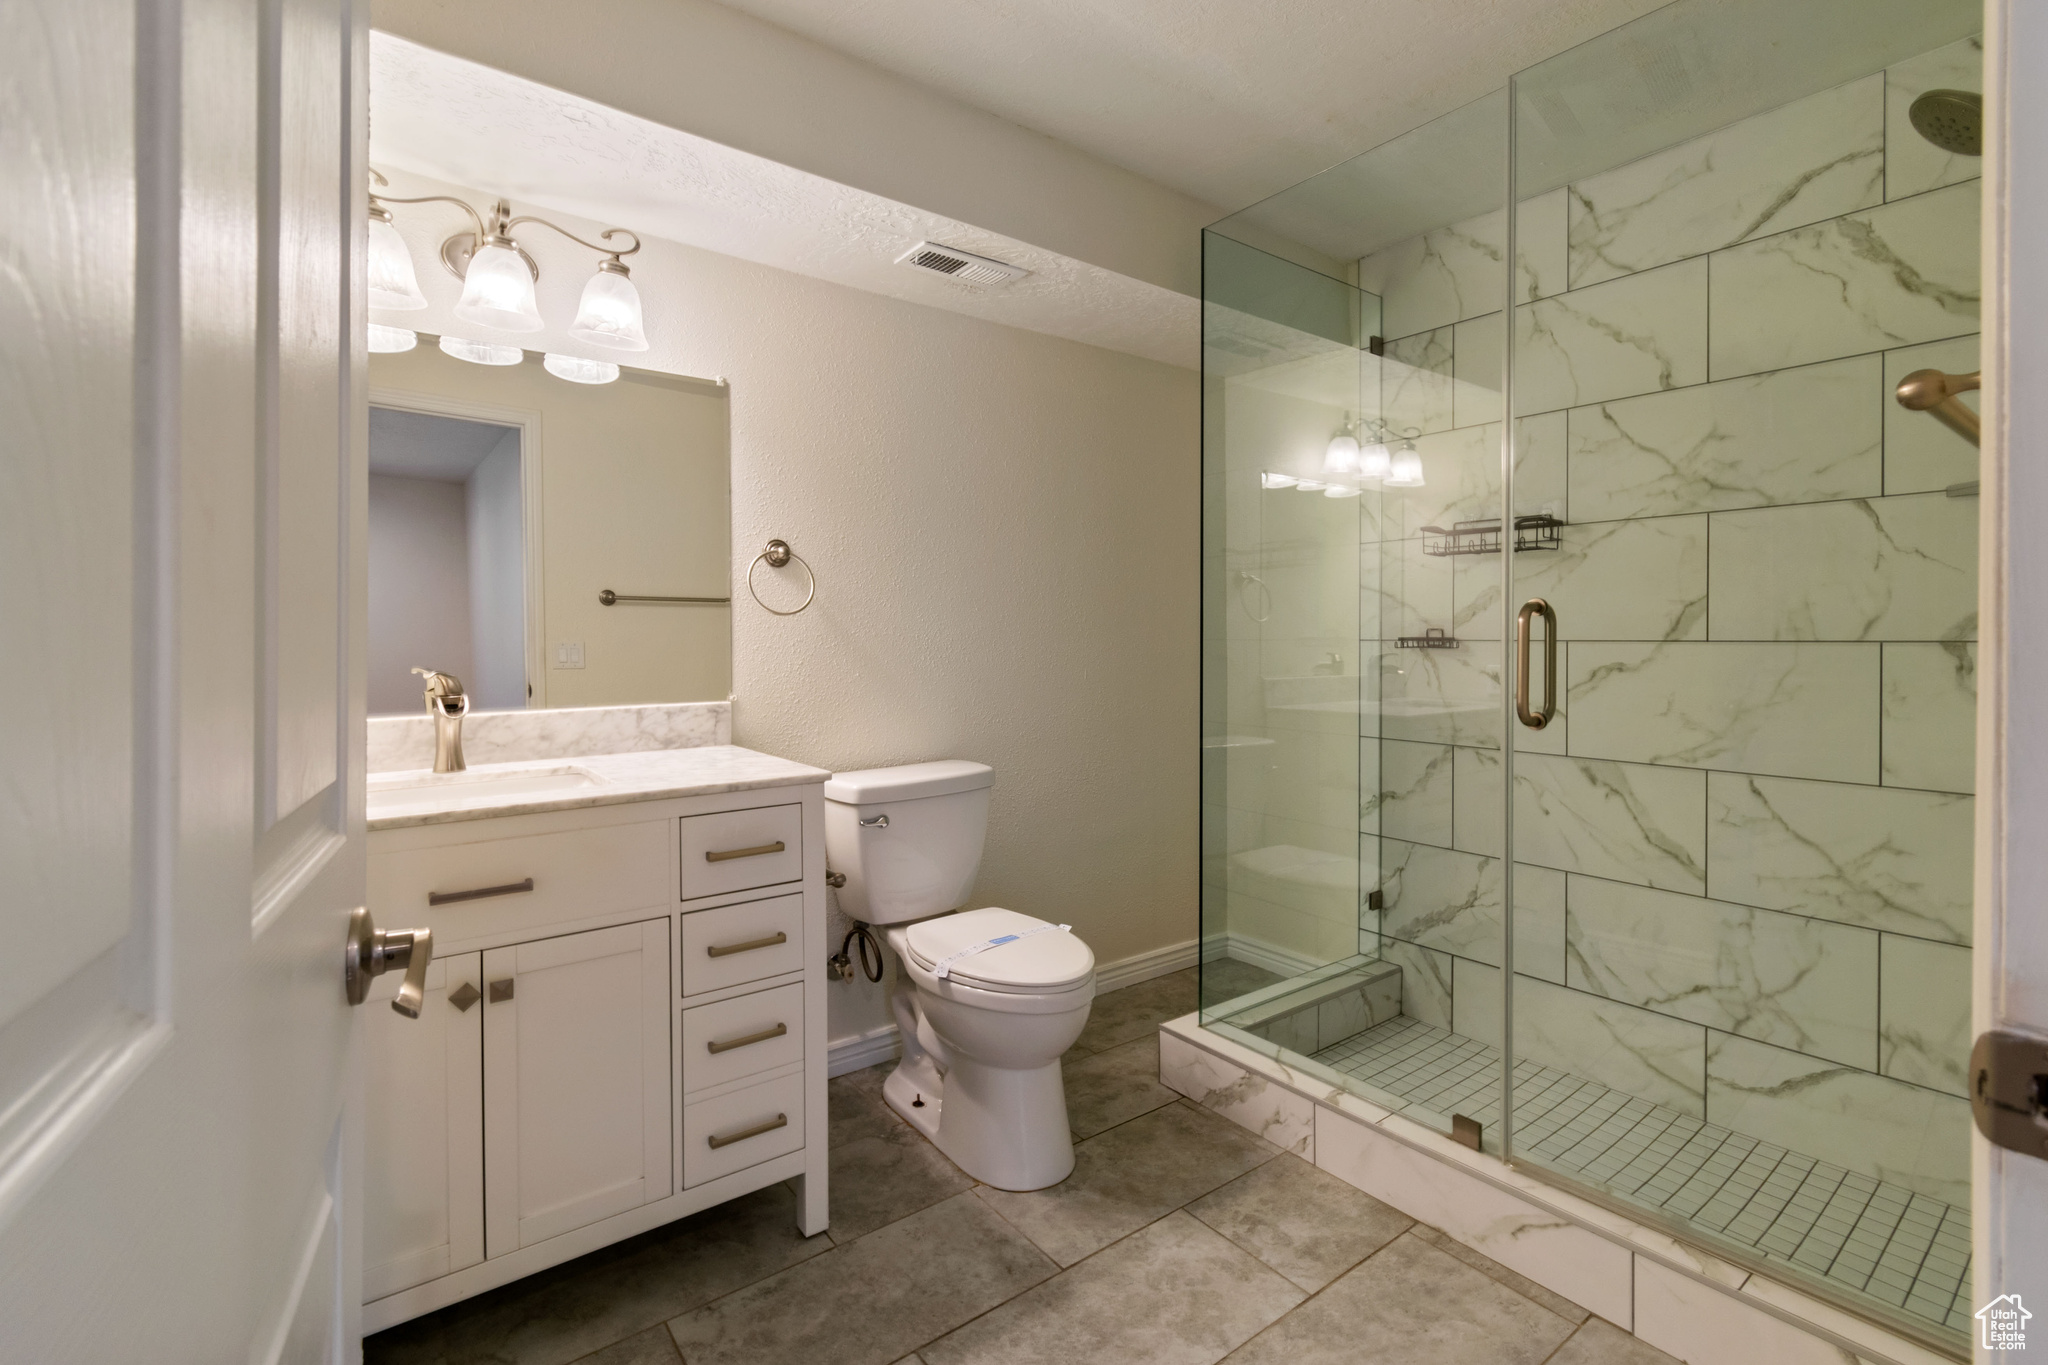 Bathroom with vanity with extensive cabinet space, a shower with door, and tile flooring